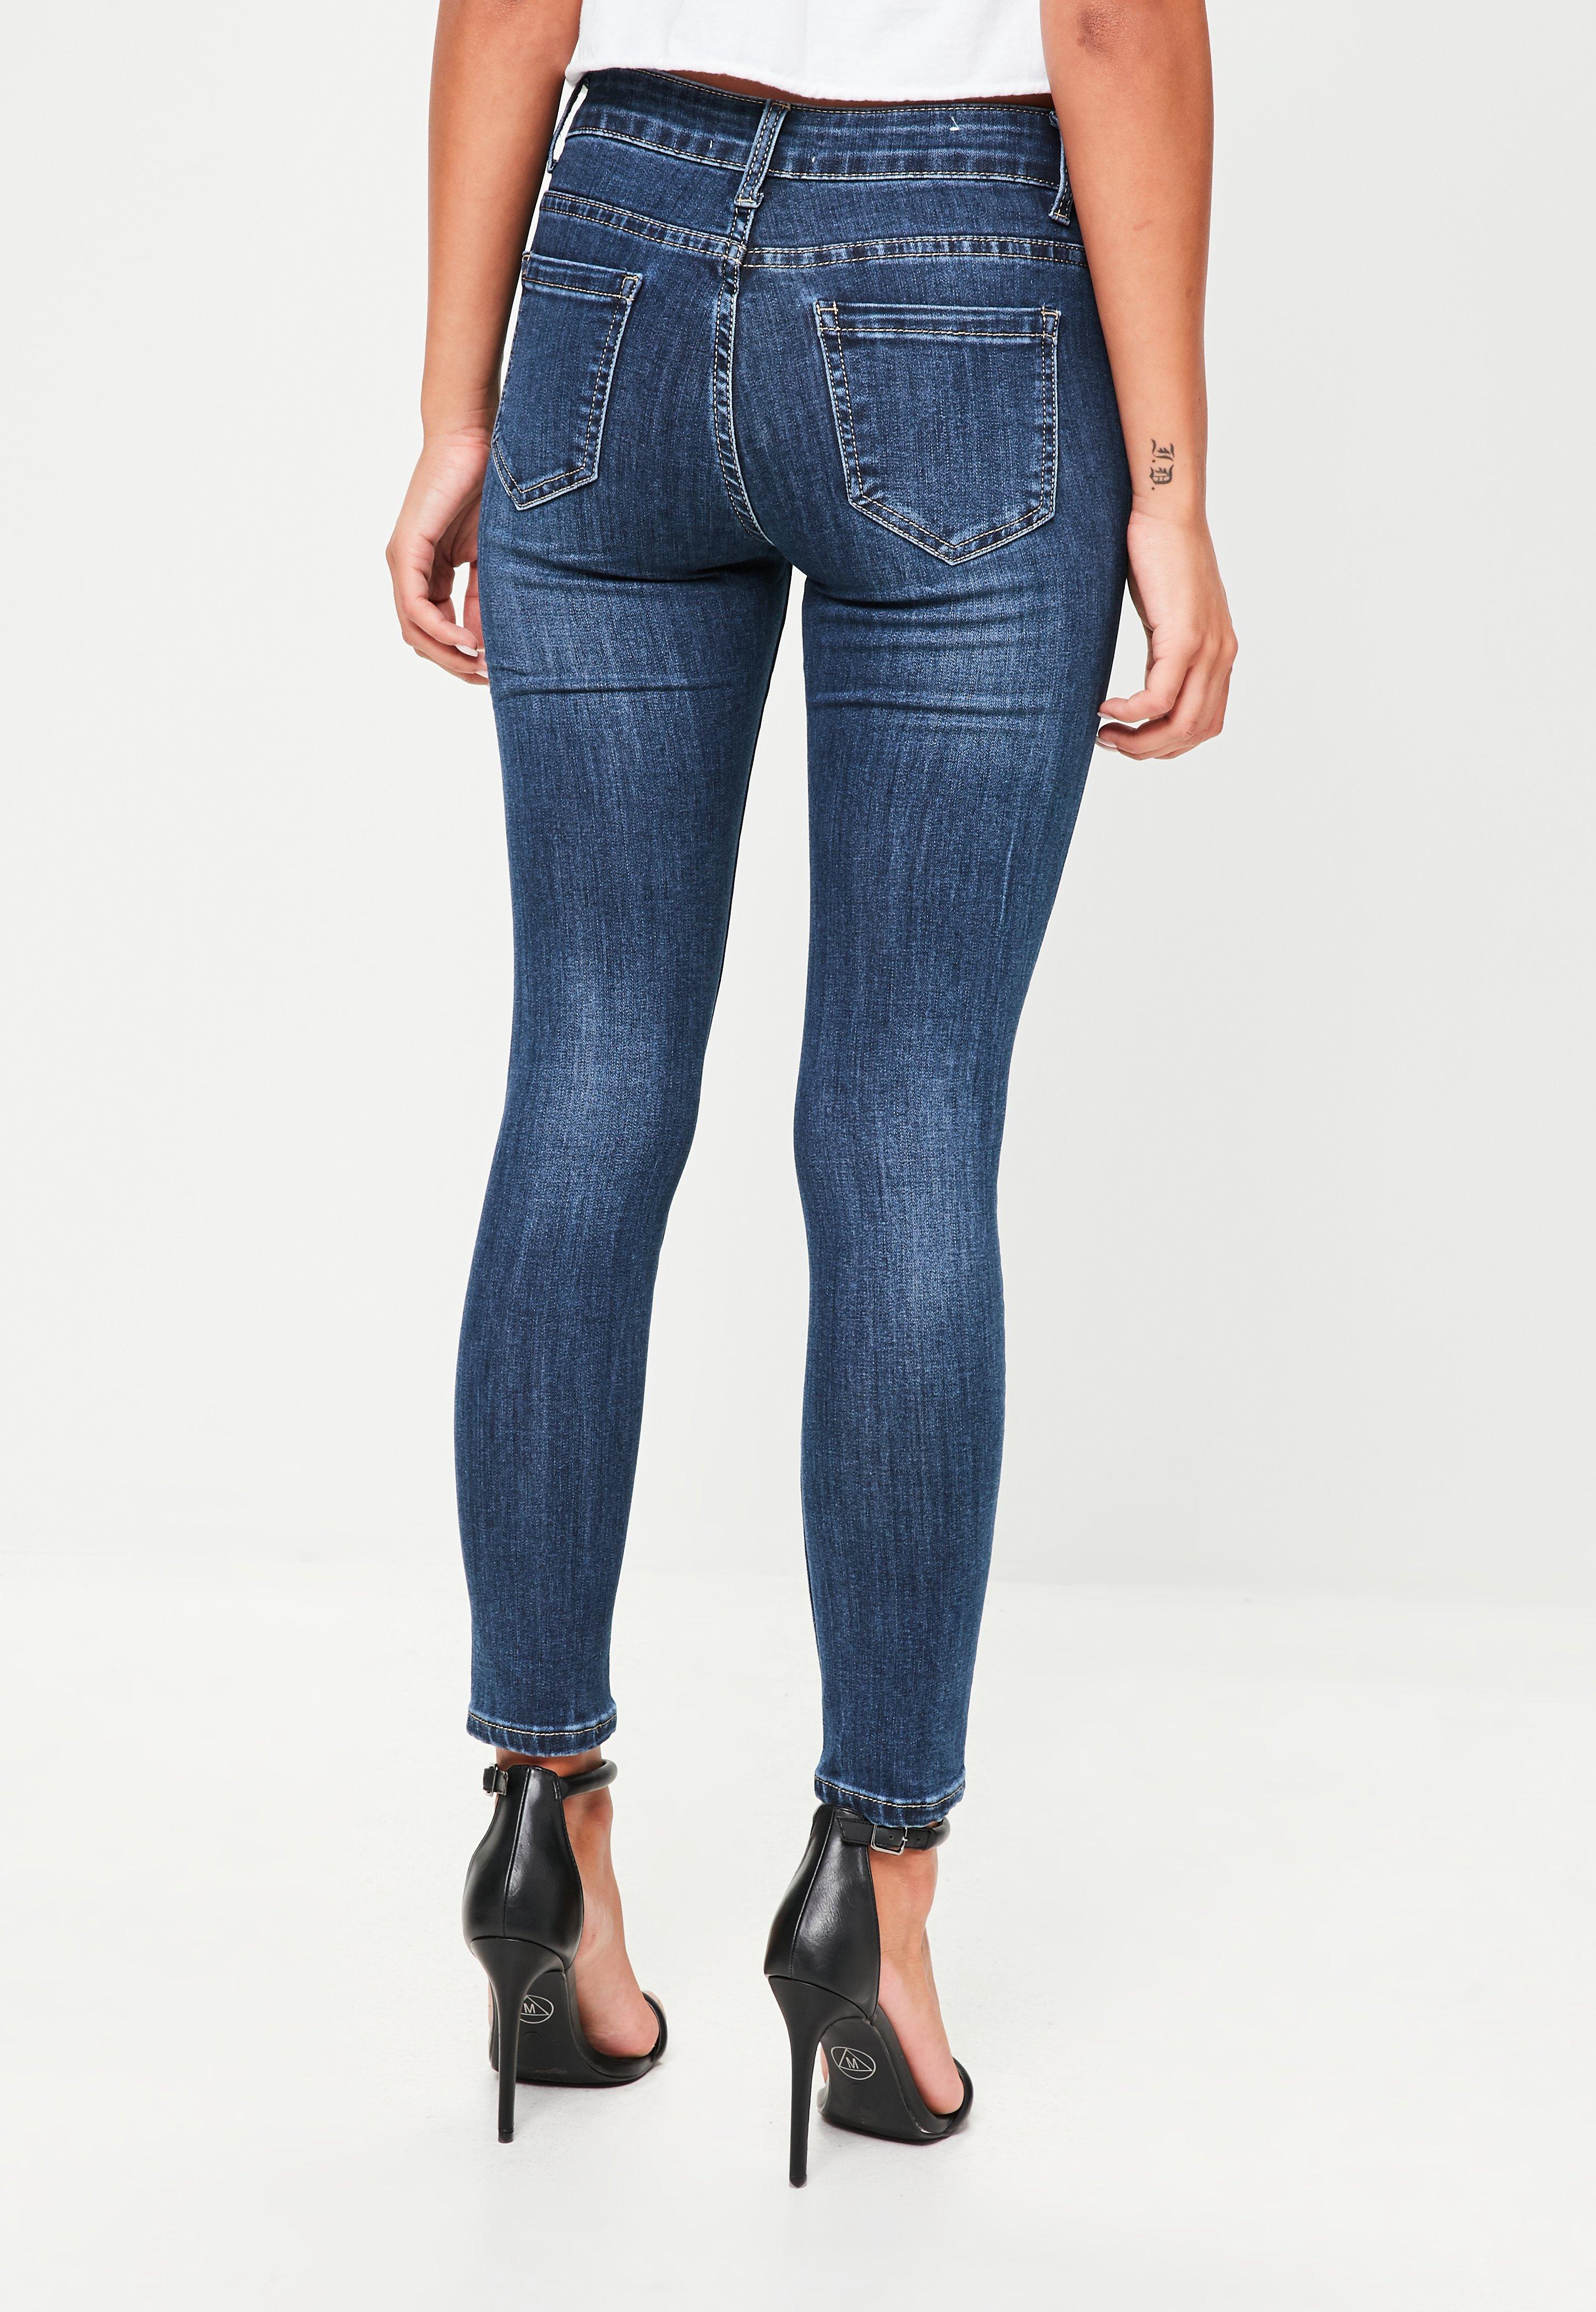 Lyst - Missguided Blue Pearl Open Knee Jeans in Blue